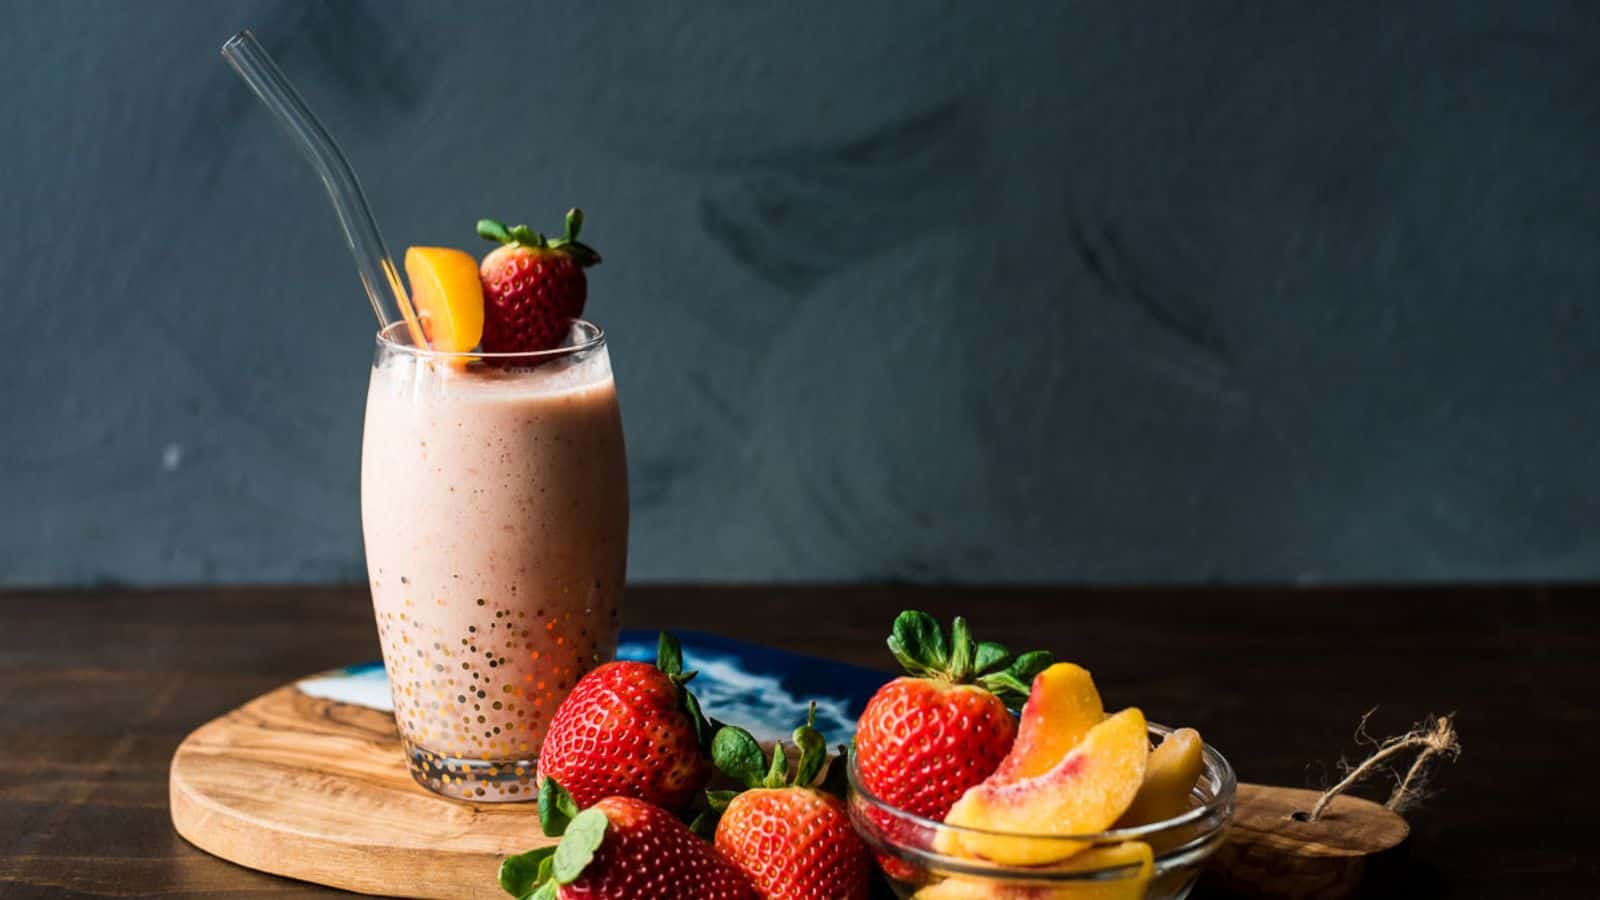 <p>This smoothie combines strawberries and peaches for a sweet, refreshing drink. It takes just 5 minutes to prepare, making it ideal for a quick, healthy option. The blend of strawberries and peaches offers a delightful mix of flavors. It’s a fruity and satisfying smoothie that’s great for any time of day.<br><strong>Get the Recipe: </strong><a href="https://reneenicoleskitchen.com/strawberry-peach-smoothie/?utm_source=msn&utm_medium=page&utm_campaign=12%20strawberry%20recipes%20you'll%20keep%20picking%20this%20summer">Strawberry Peach Smoothie</a></p>